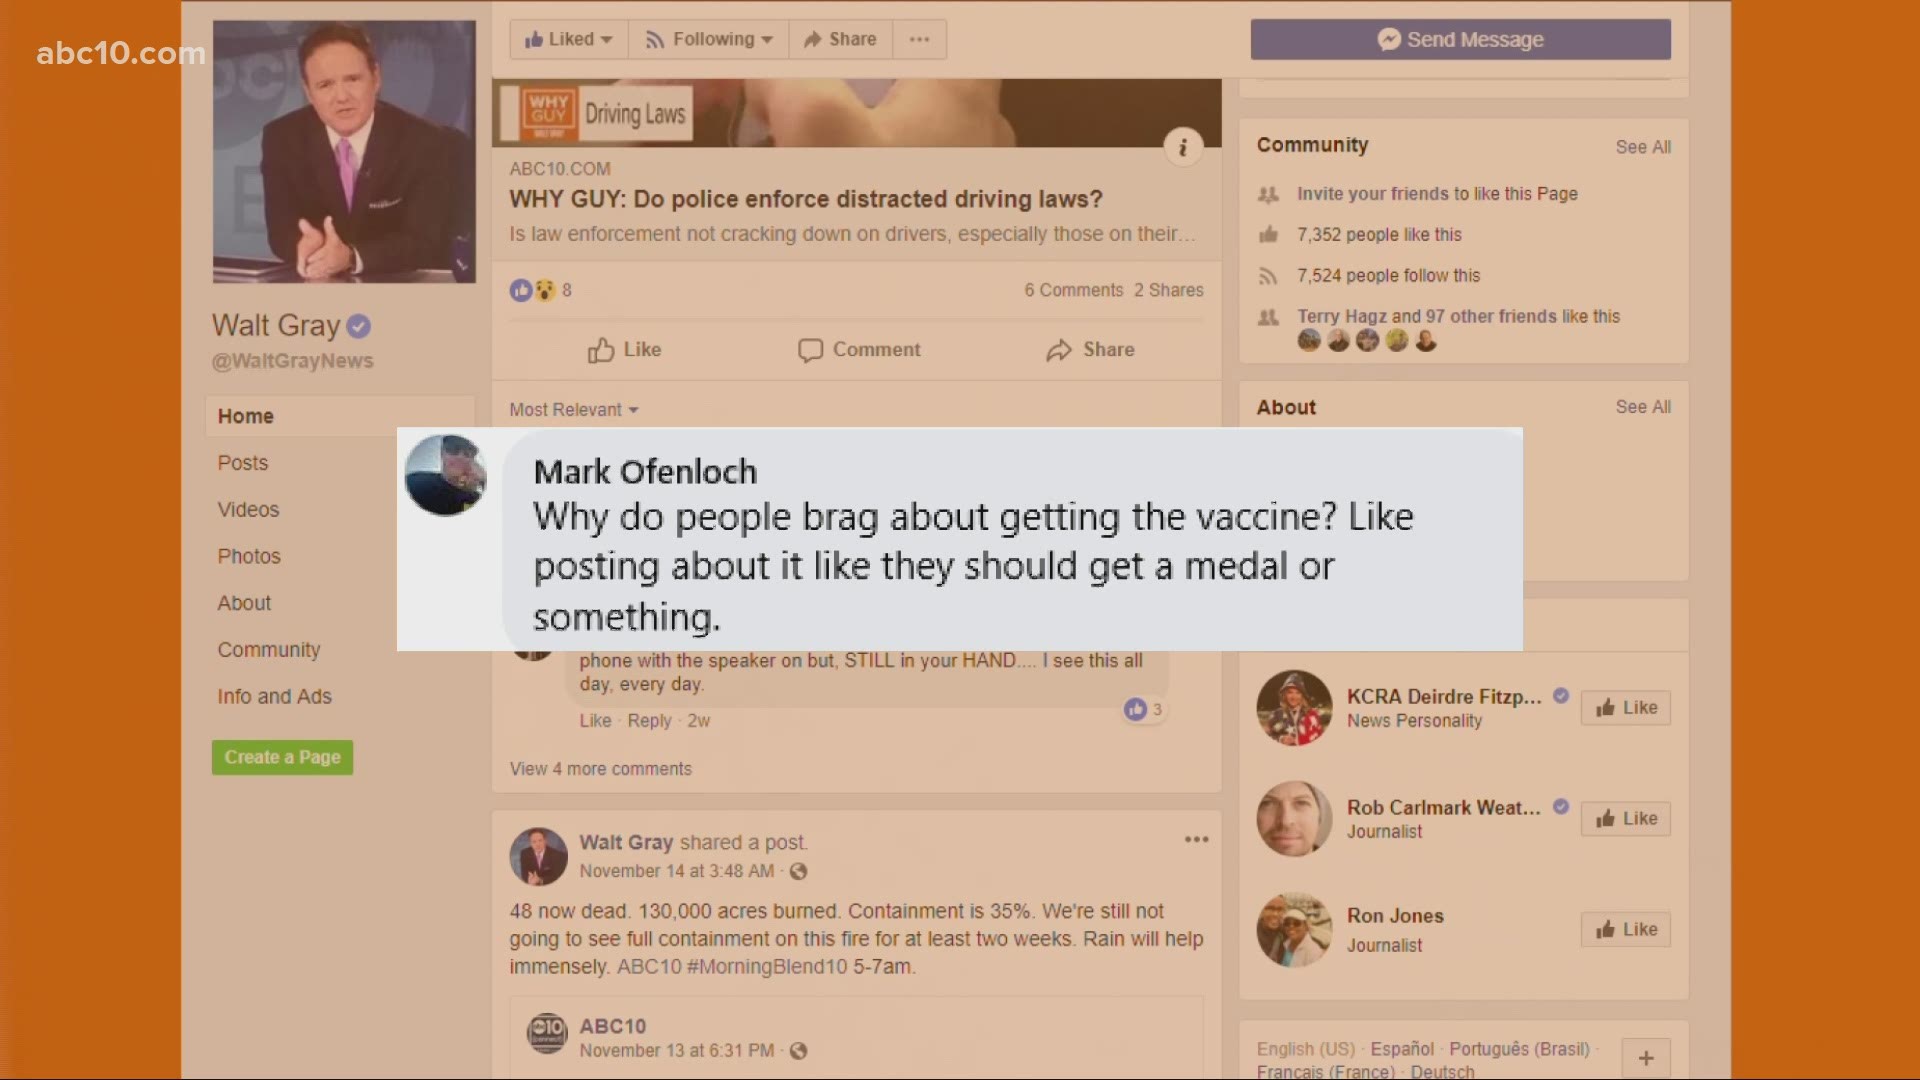 Walt Gray tackles social media posts about getting vaccinated.